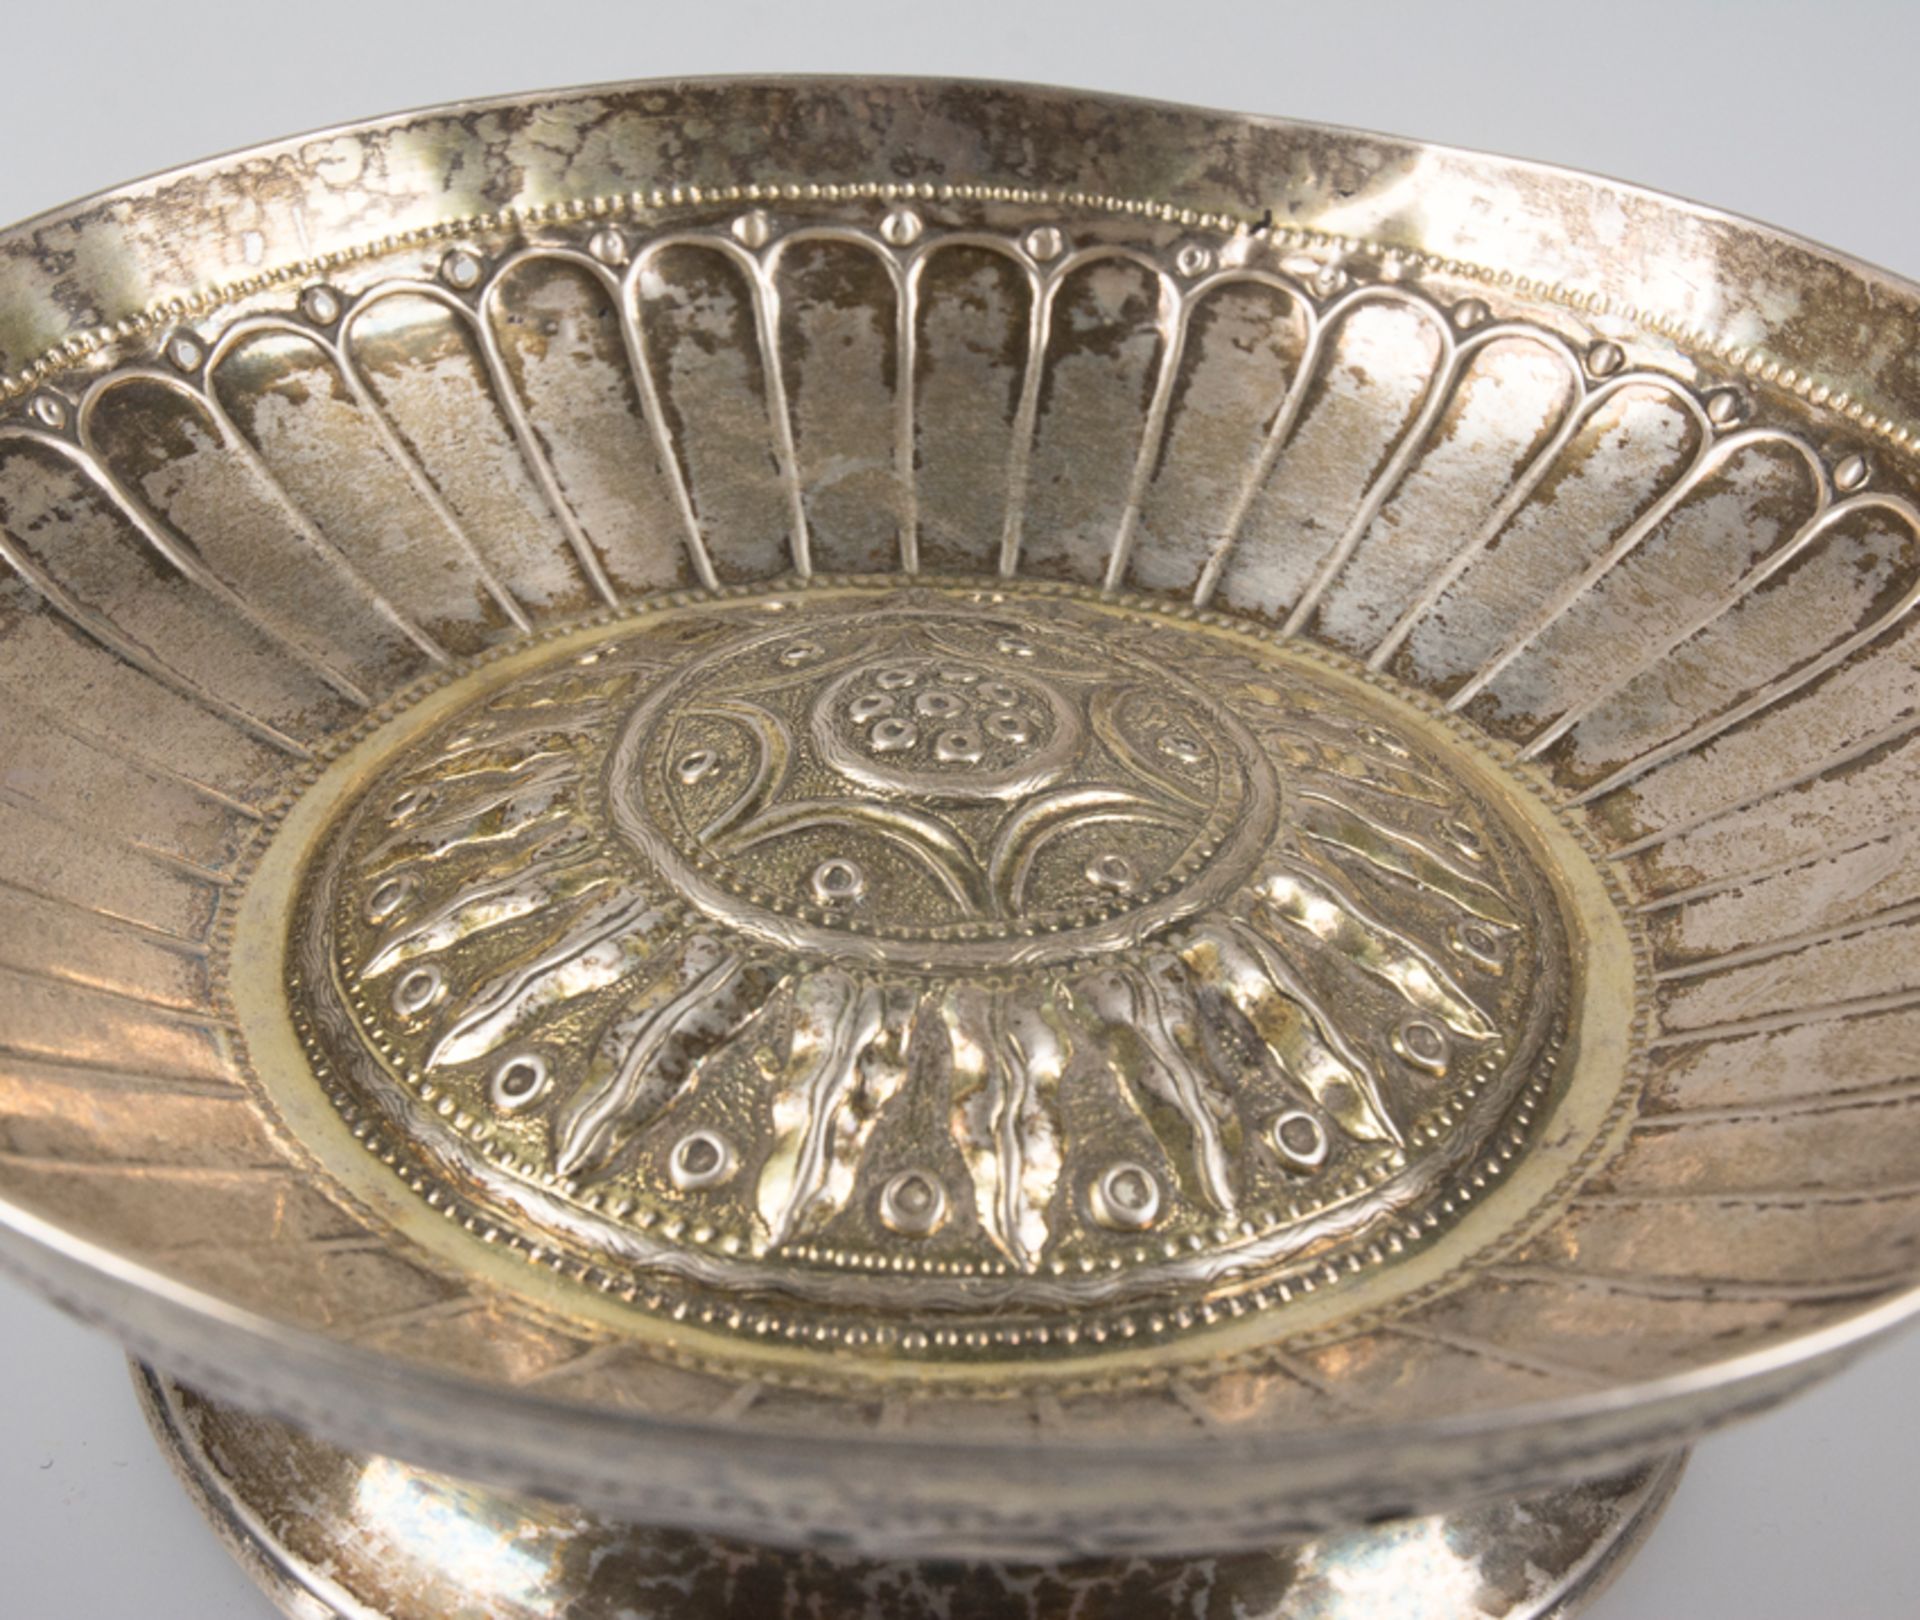 Embossed and chased silver tray with gilt residue. Possibly from Guatemala. 18th century. - Image 4 of 4